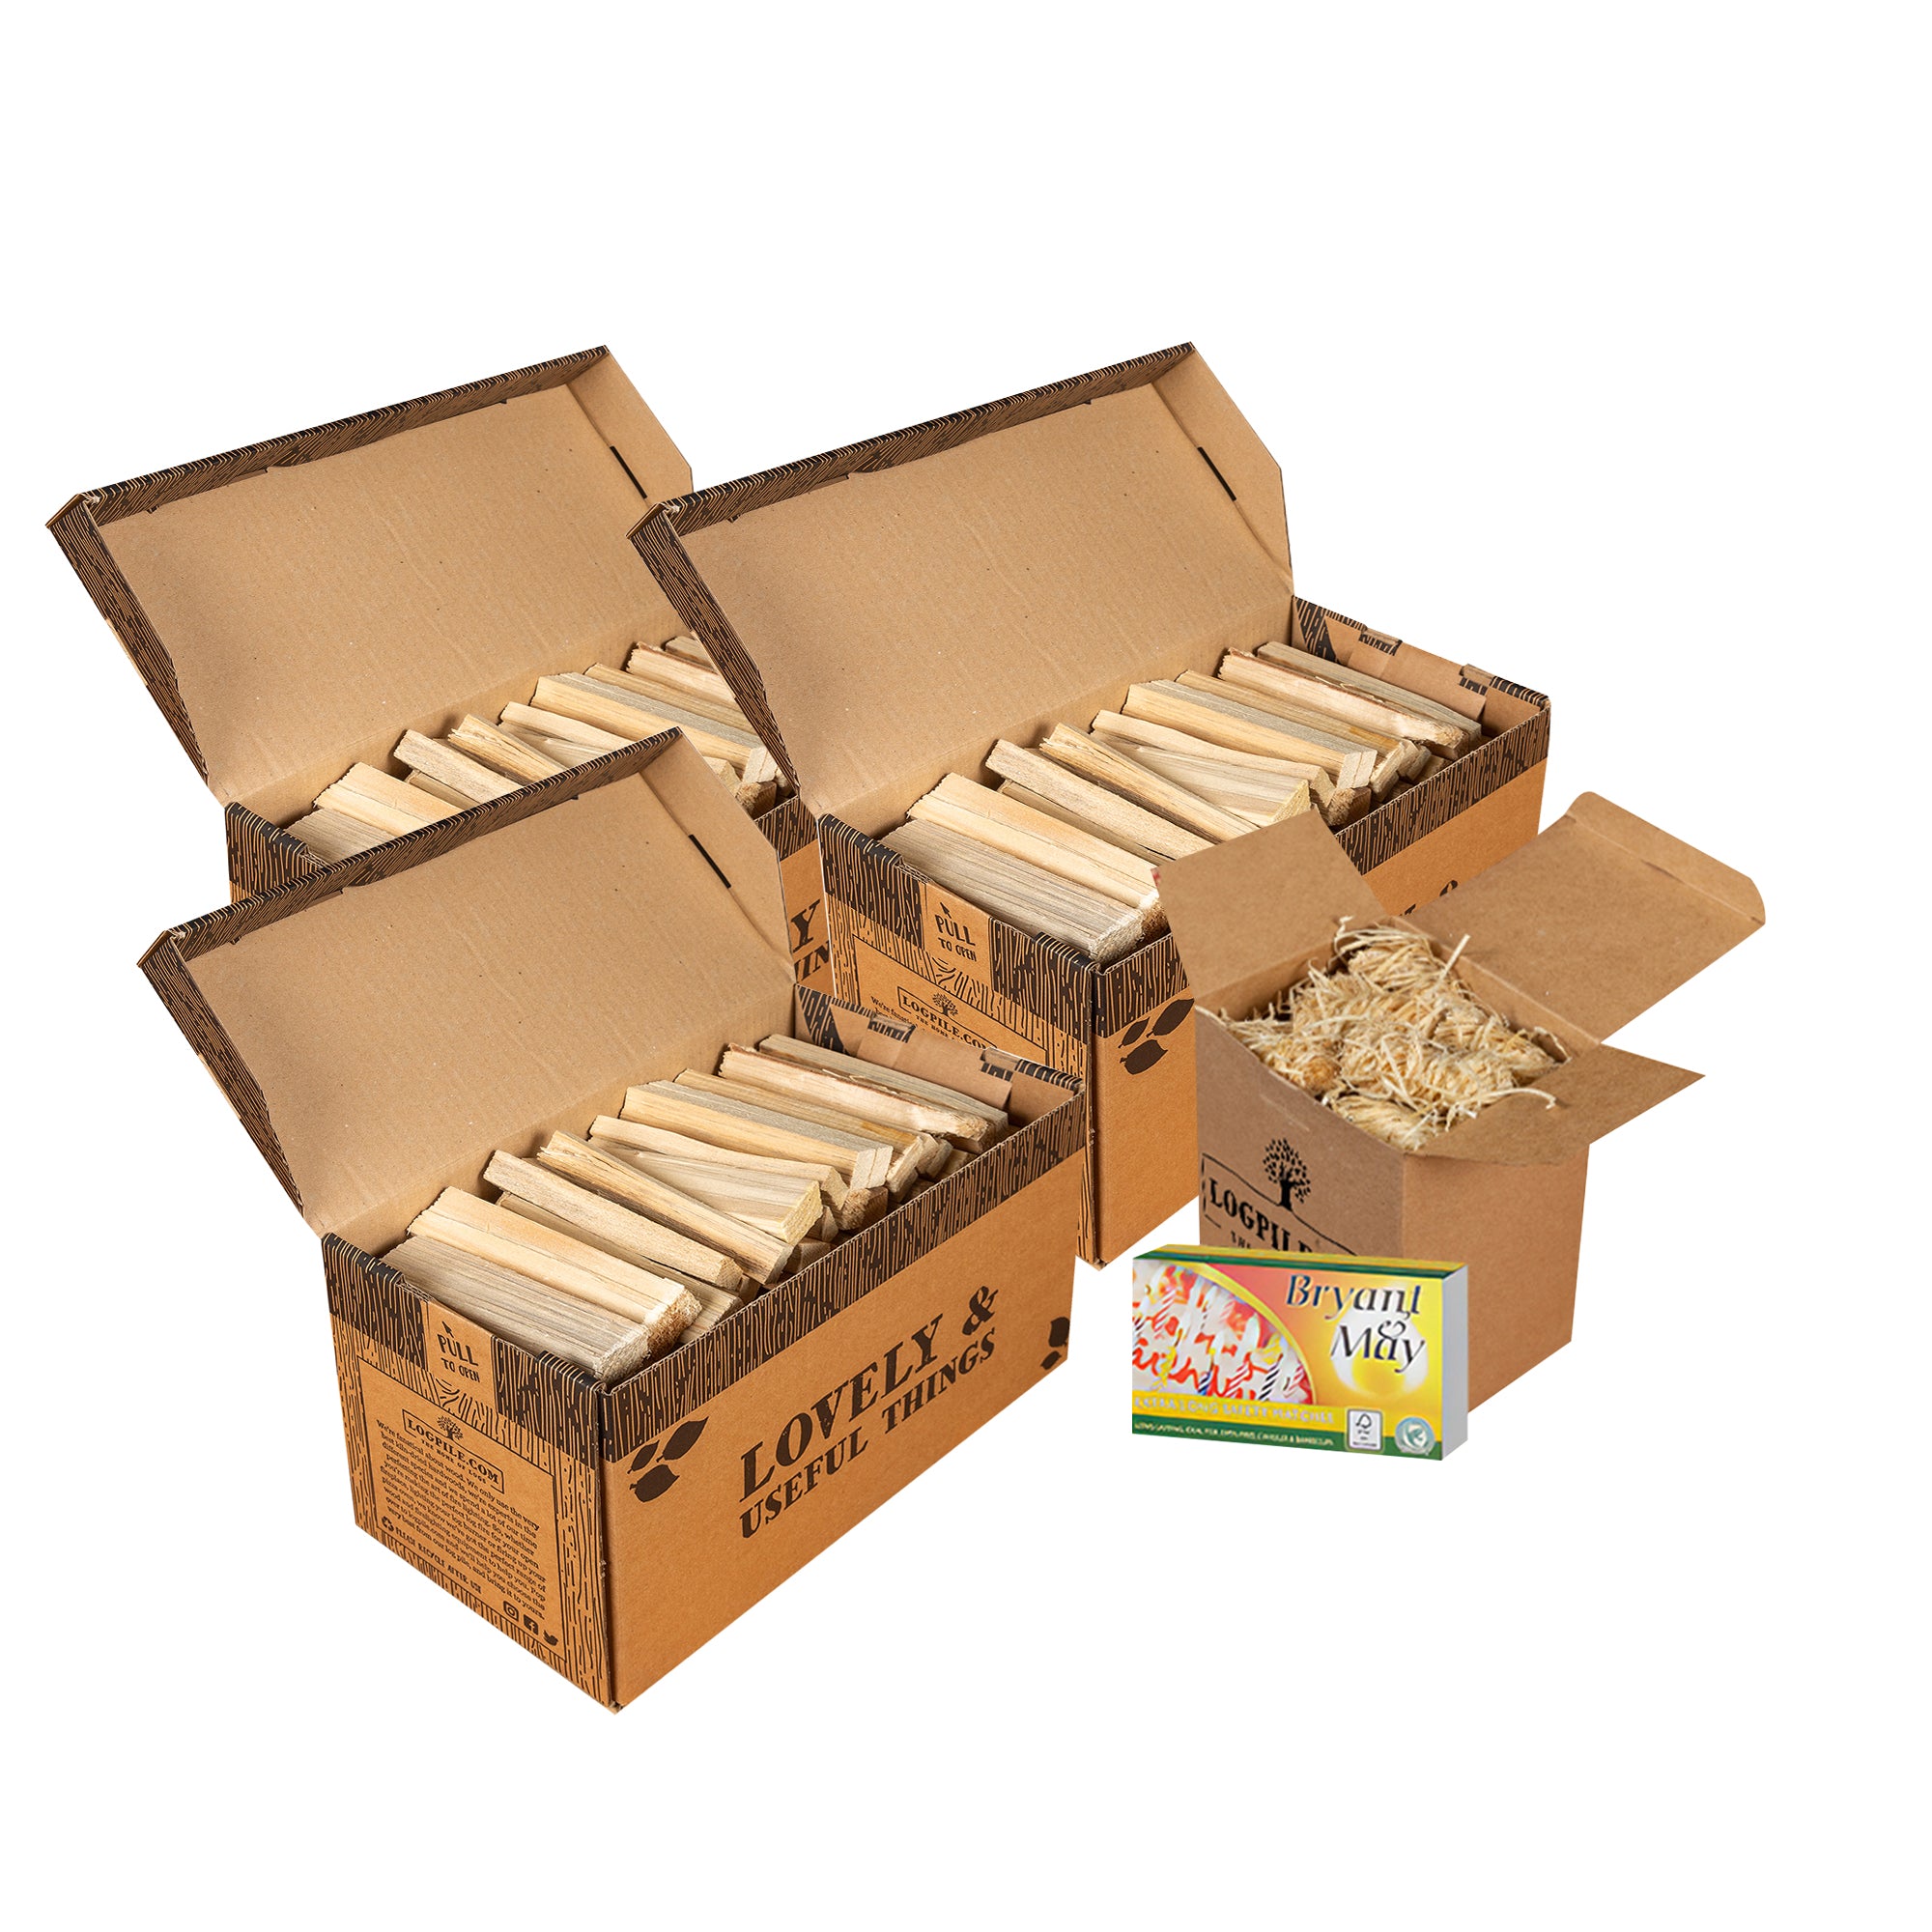 Try our kindling kit, with kiln dried kindling, natural firelighters and matches.